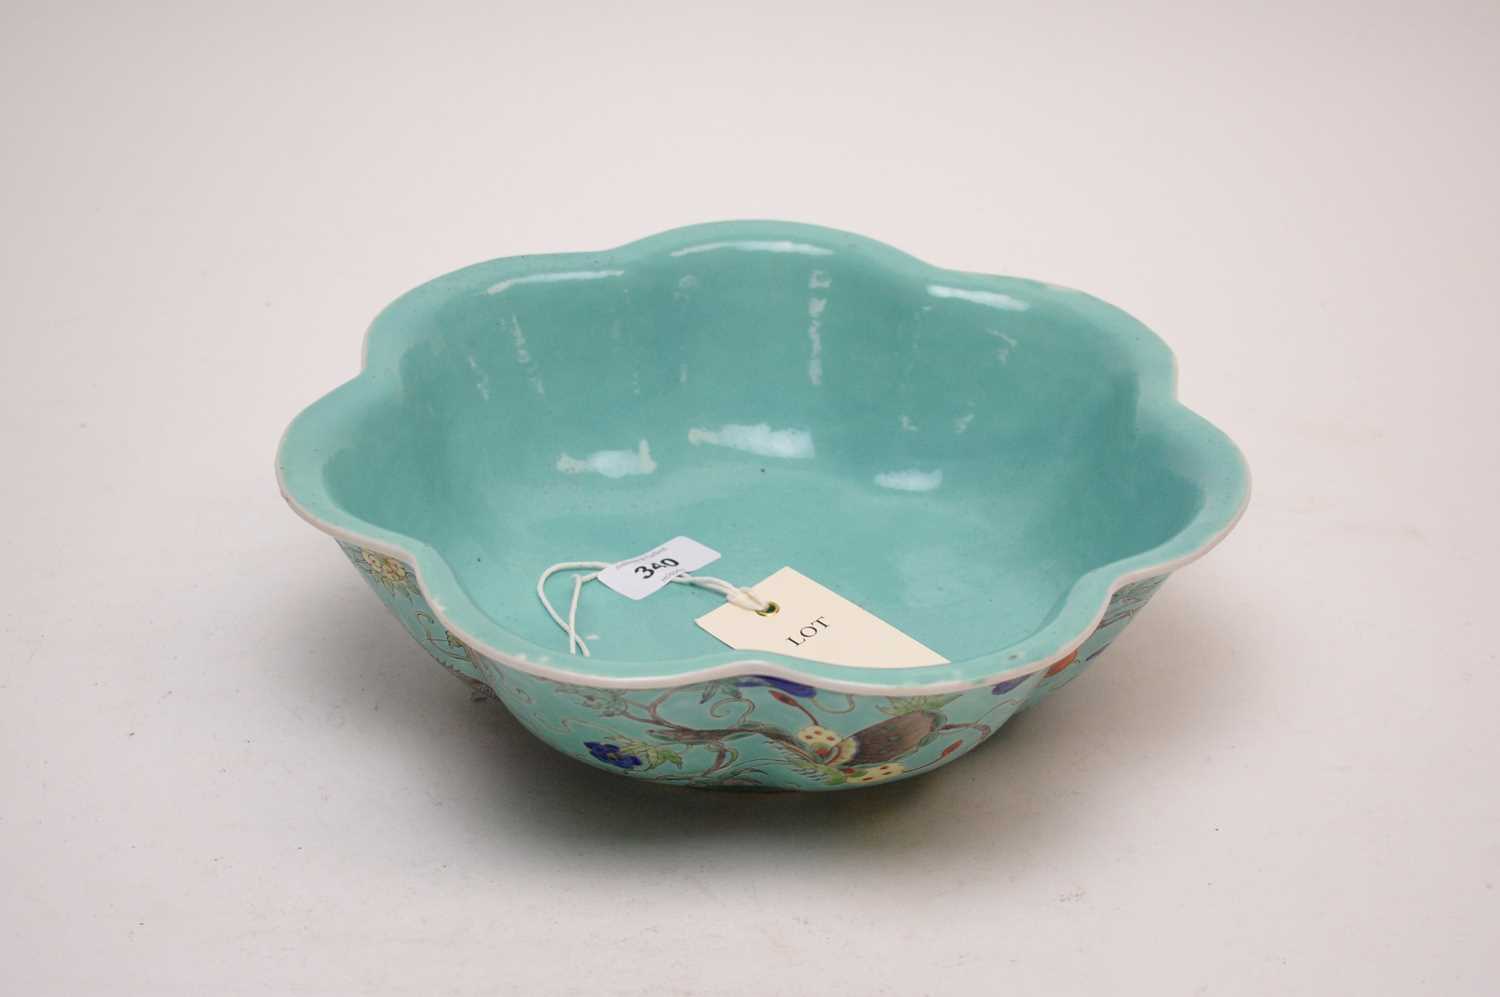 Lot 340 - A Chinese scalloped circular bowl, decorated with butterflies, flowers and foliage.